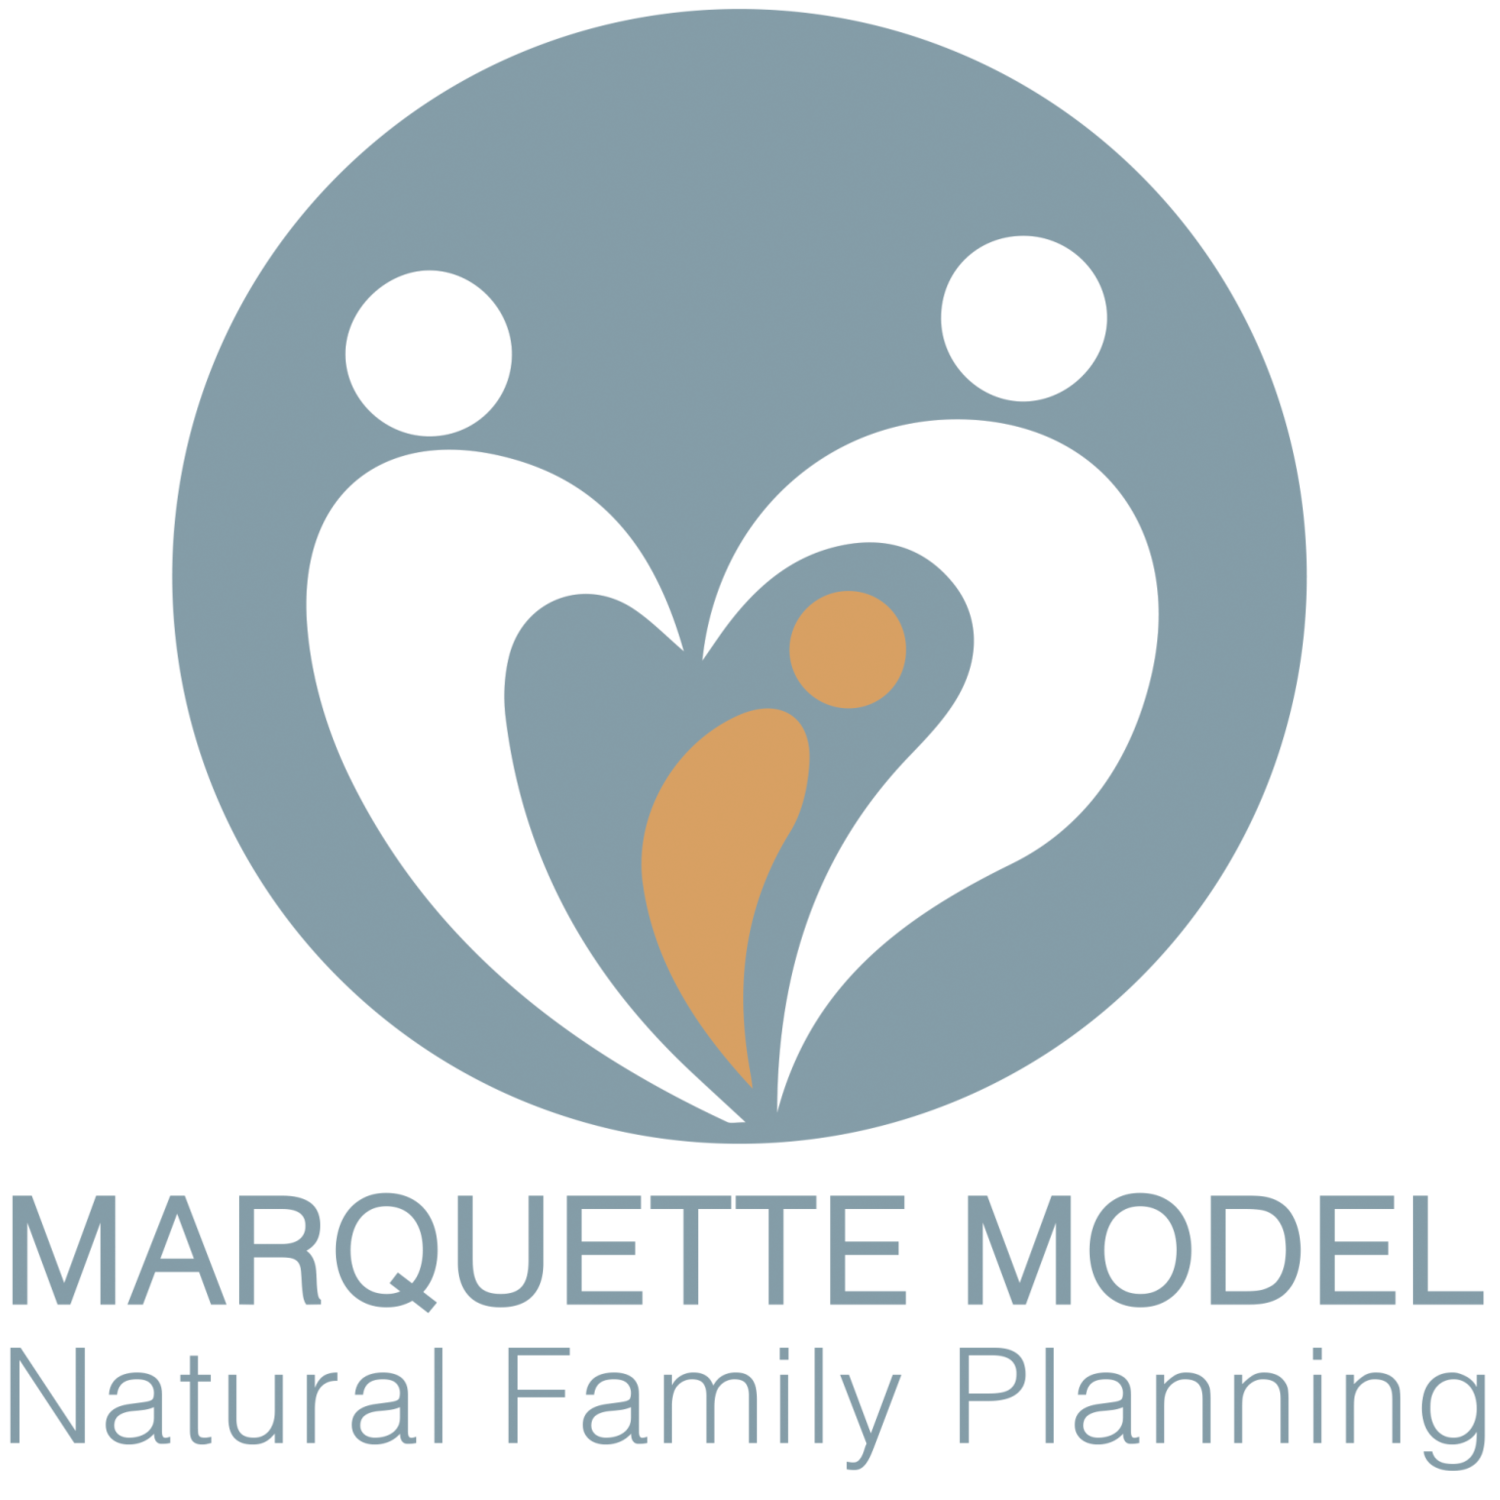 NFP Marquette Method